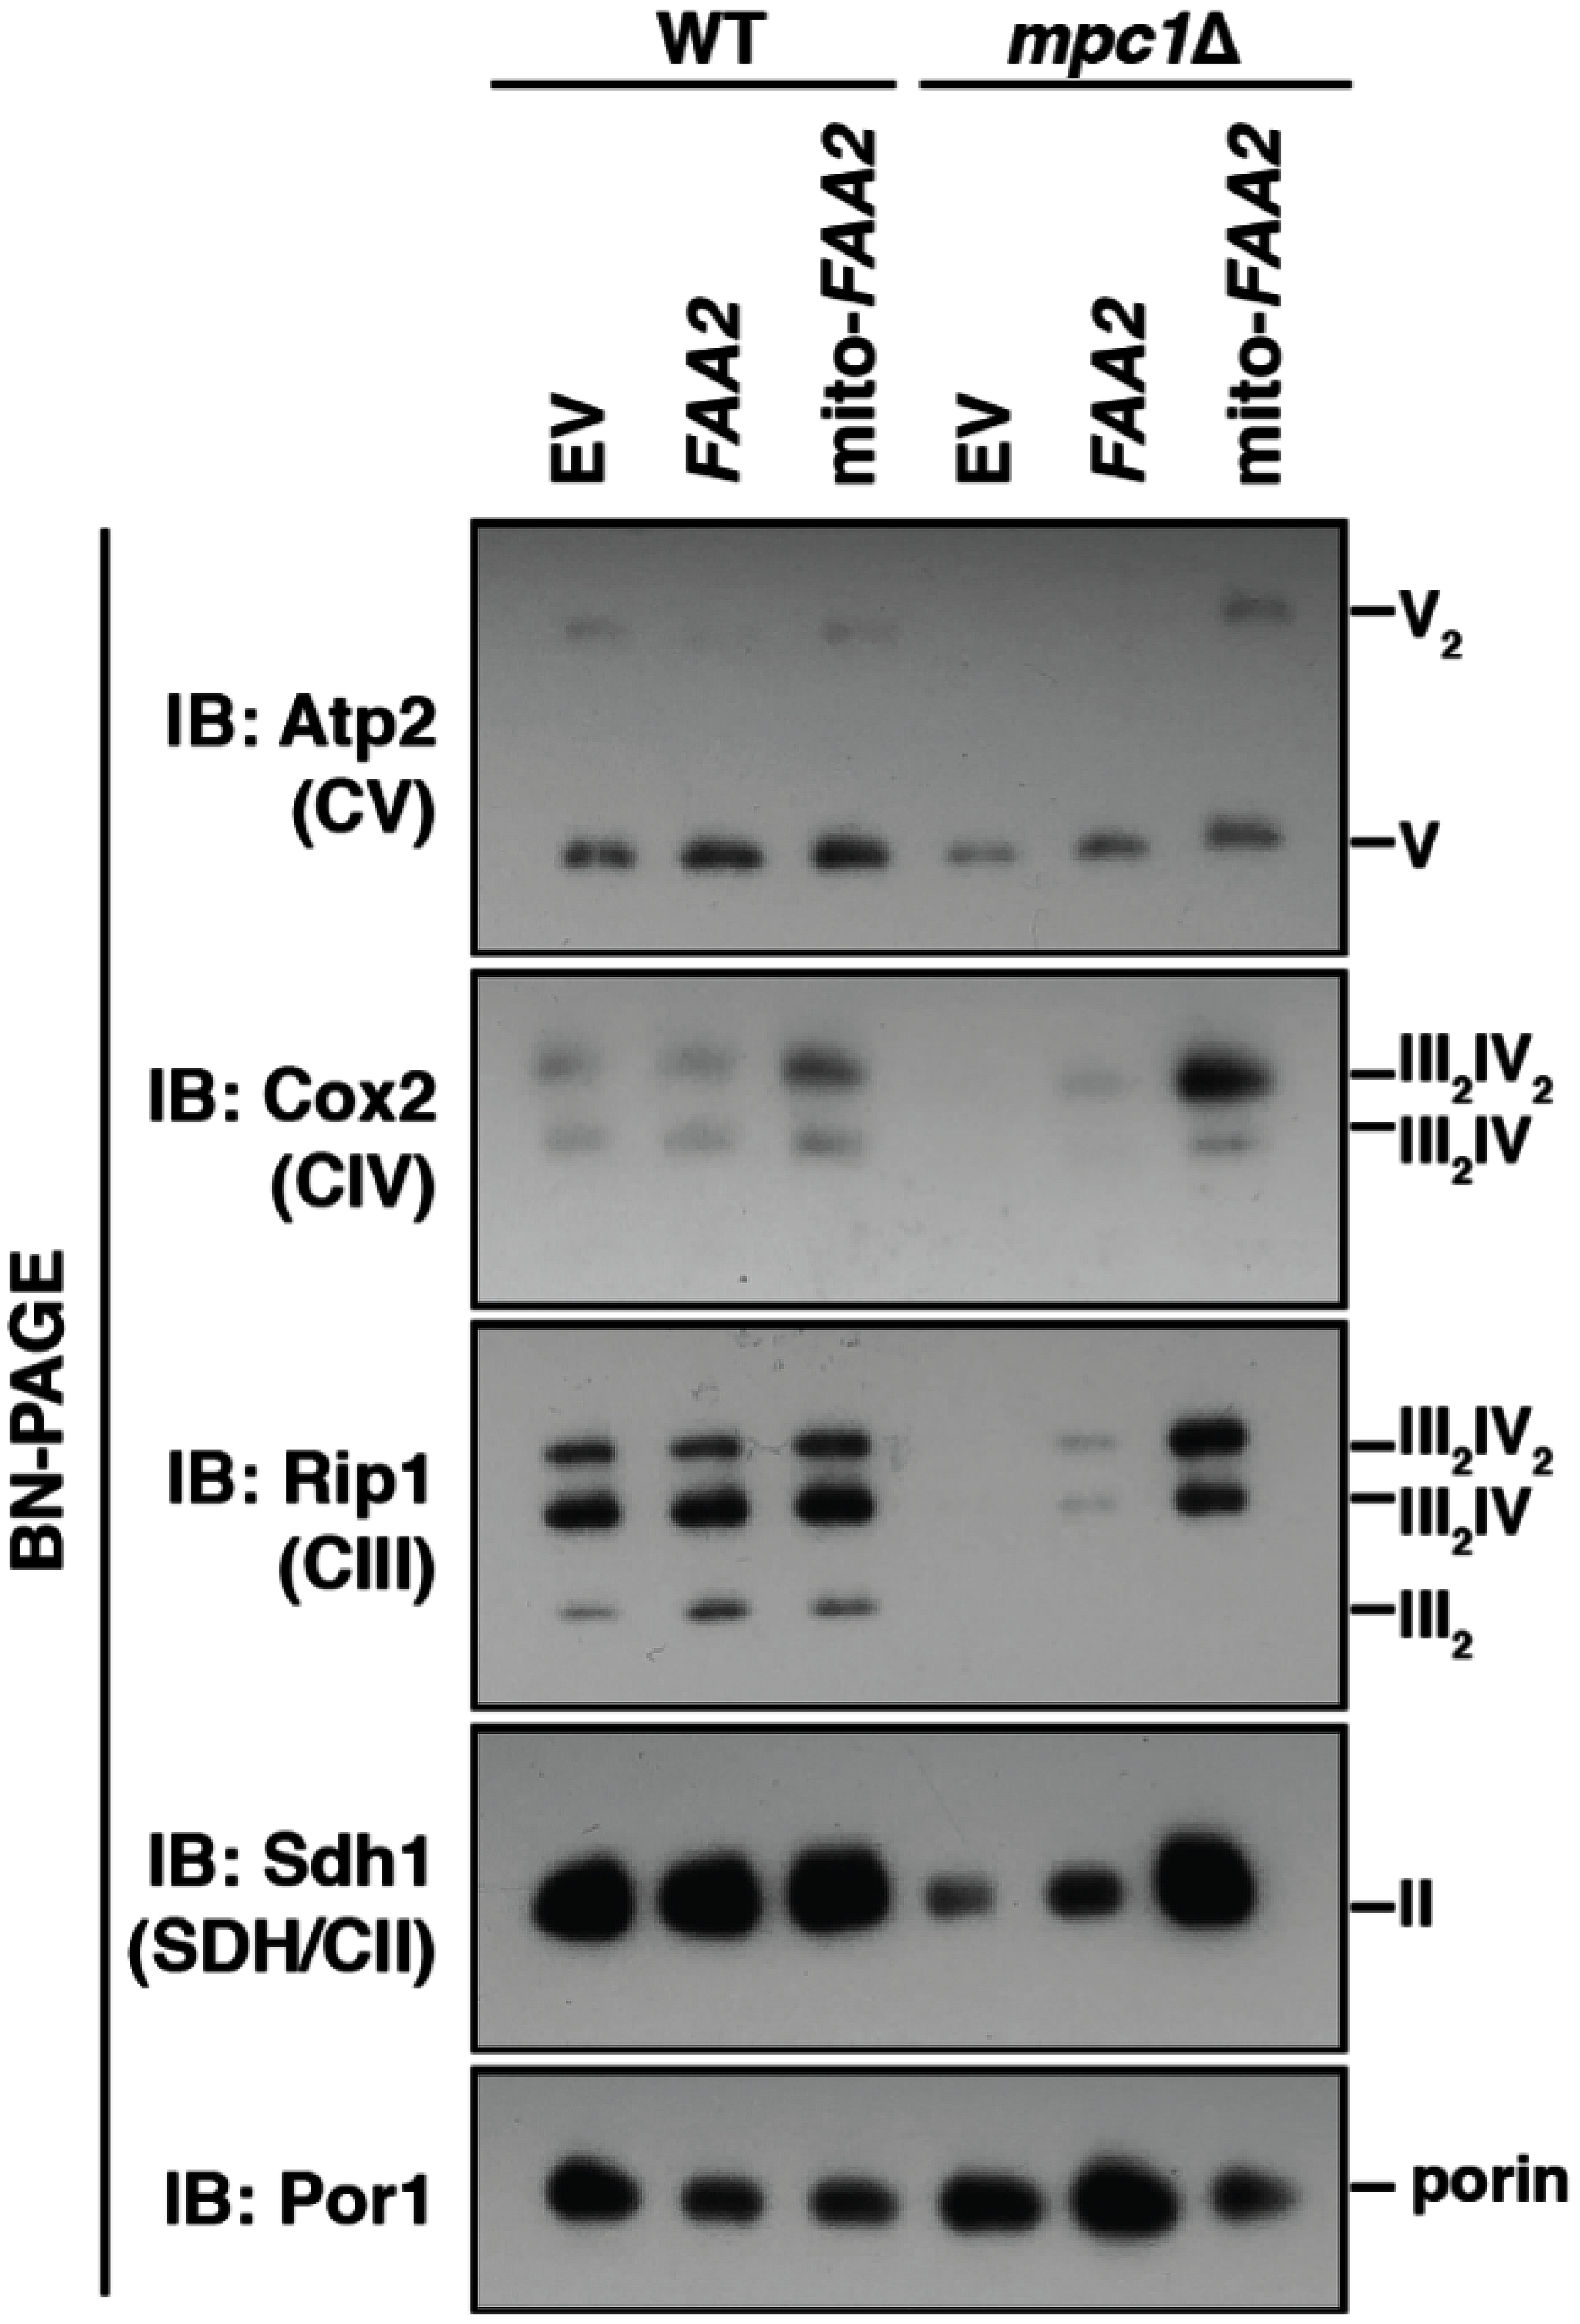 Western blot showing that yeast with impaired production of mitochondrial acetyl-CoA due to loss of the mitochondrial pyruvate carrier (mpc1D) have impaired assembly of respiratory complexes unless they are provided with an alternative means of acylation of the Acp1 protein. This is accomplished by targeting of the Faa2 protein to mitochondrial (mito-FAA2).